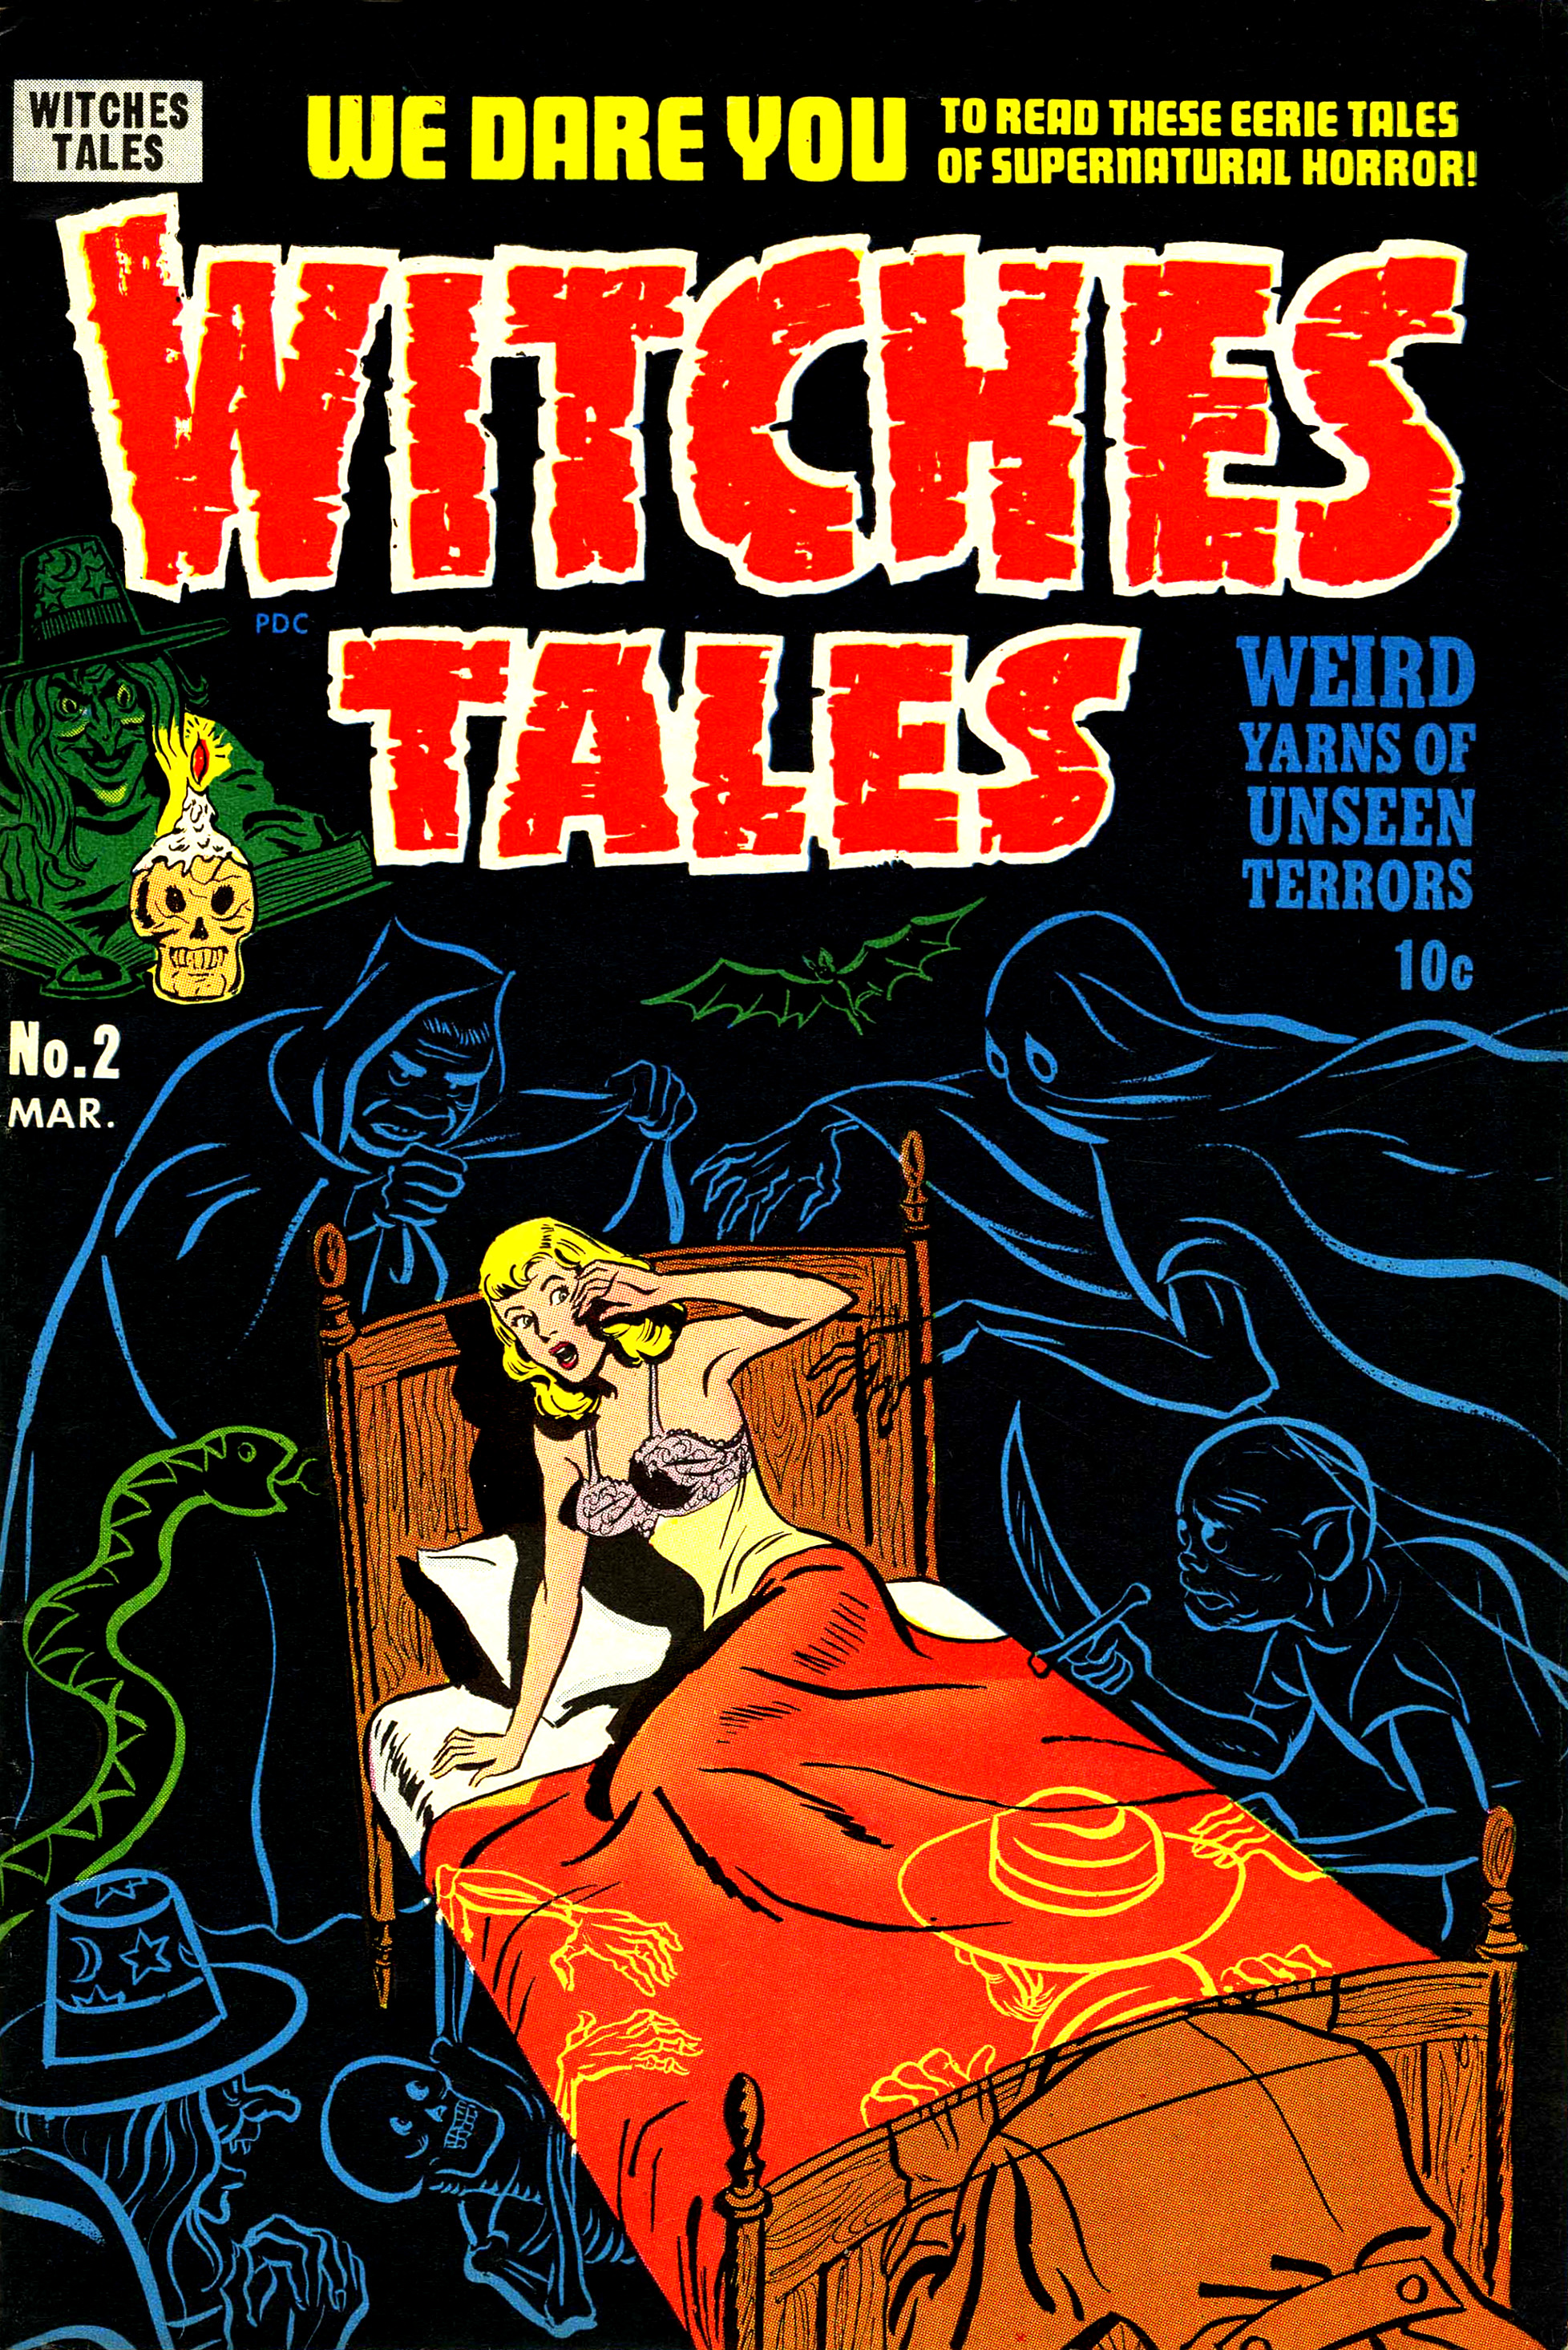 Witches Tales #2, Al Avison Cover (Harvey, 1951)